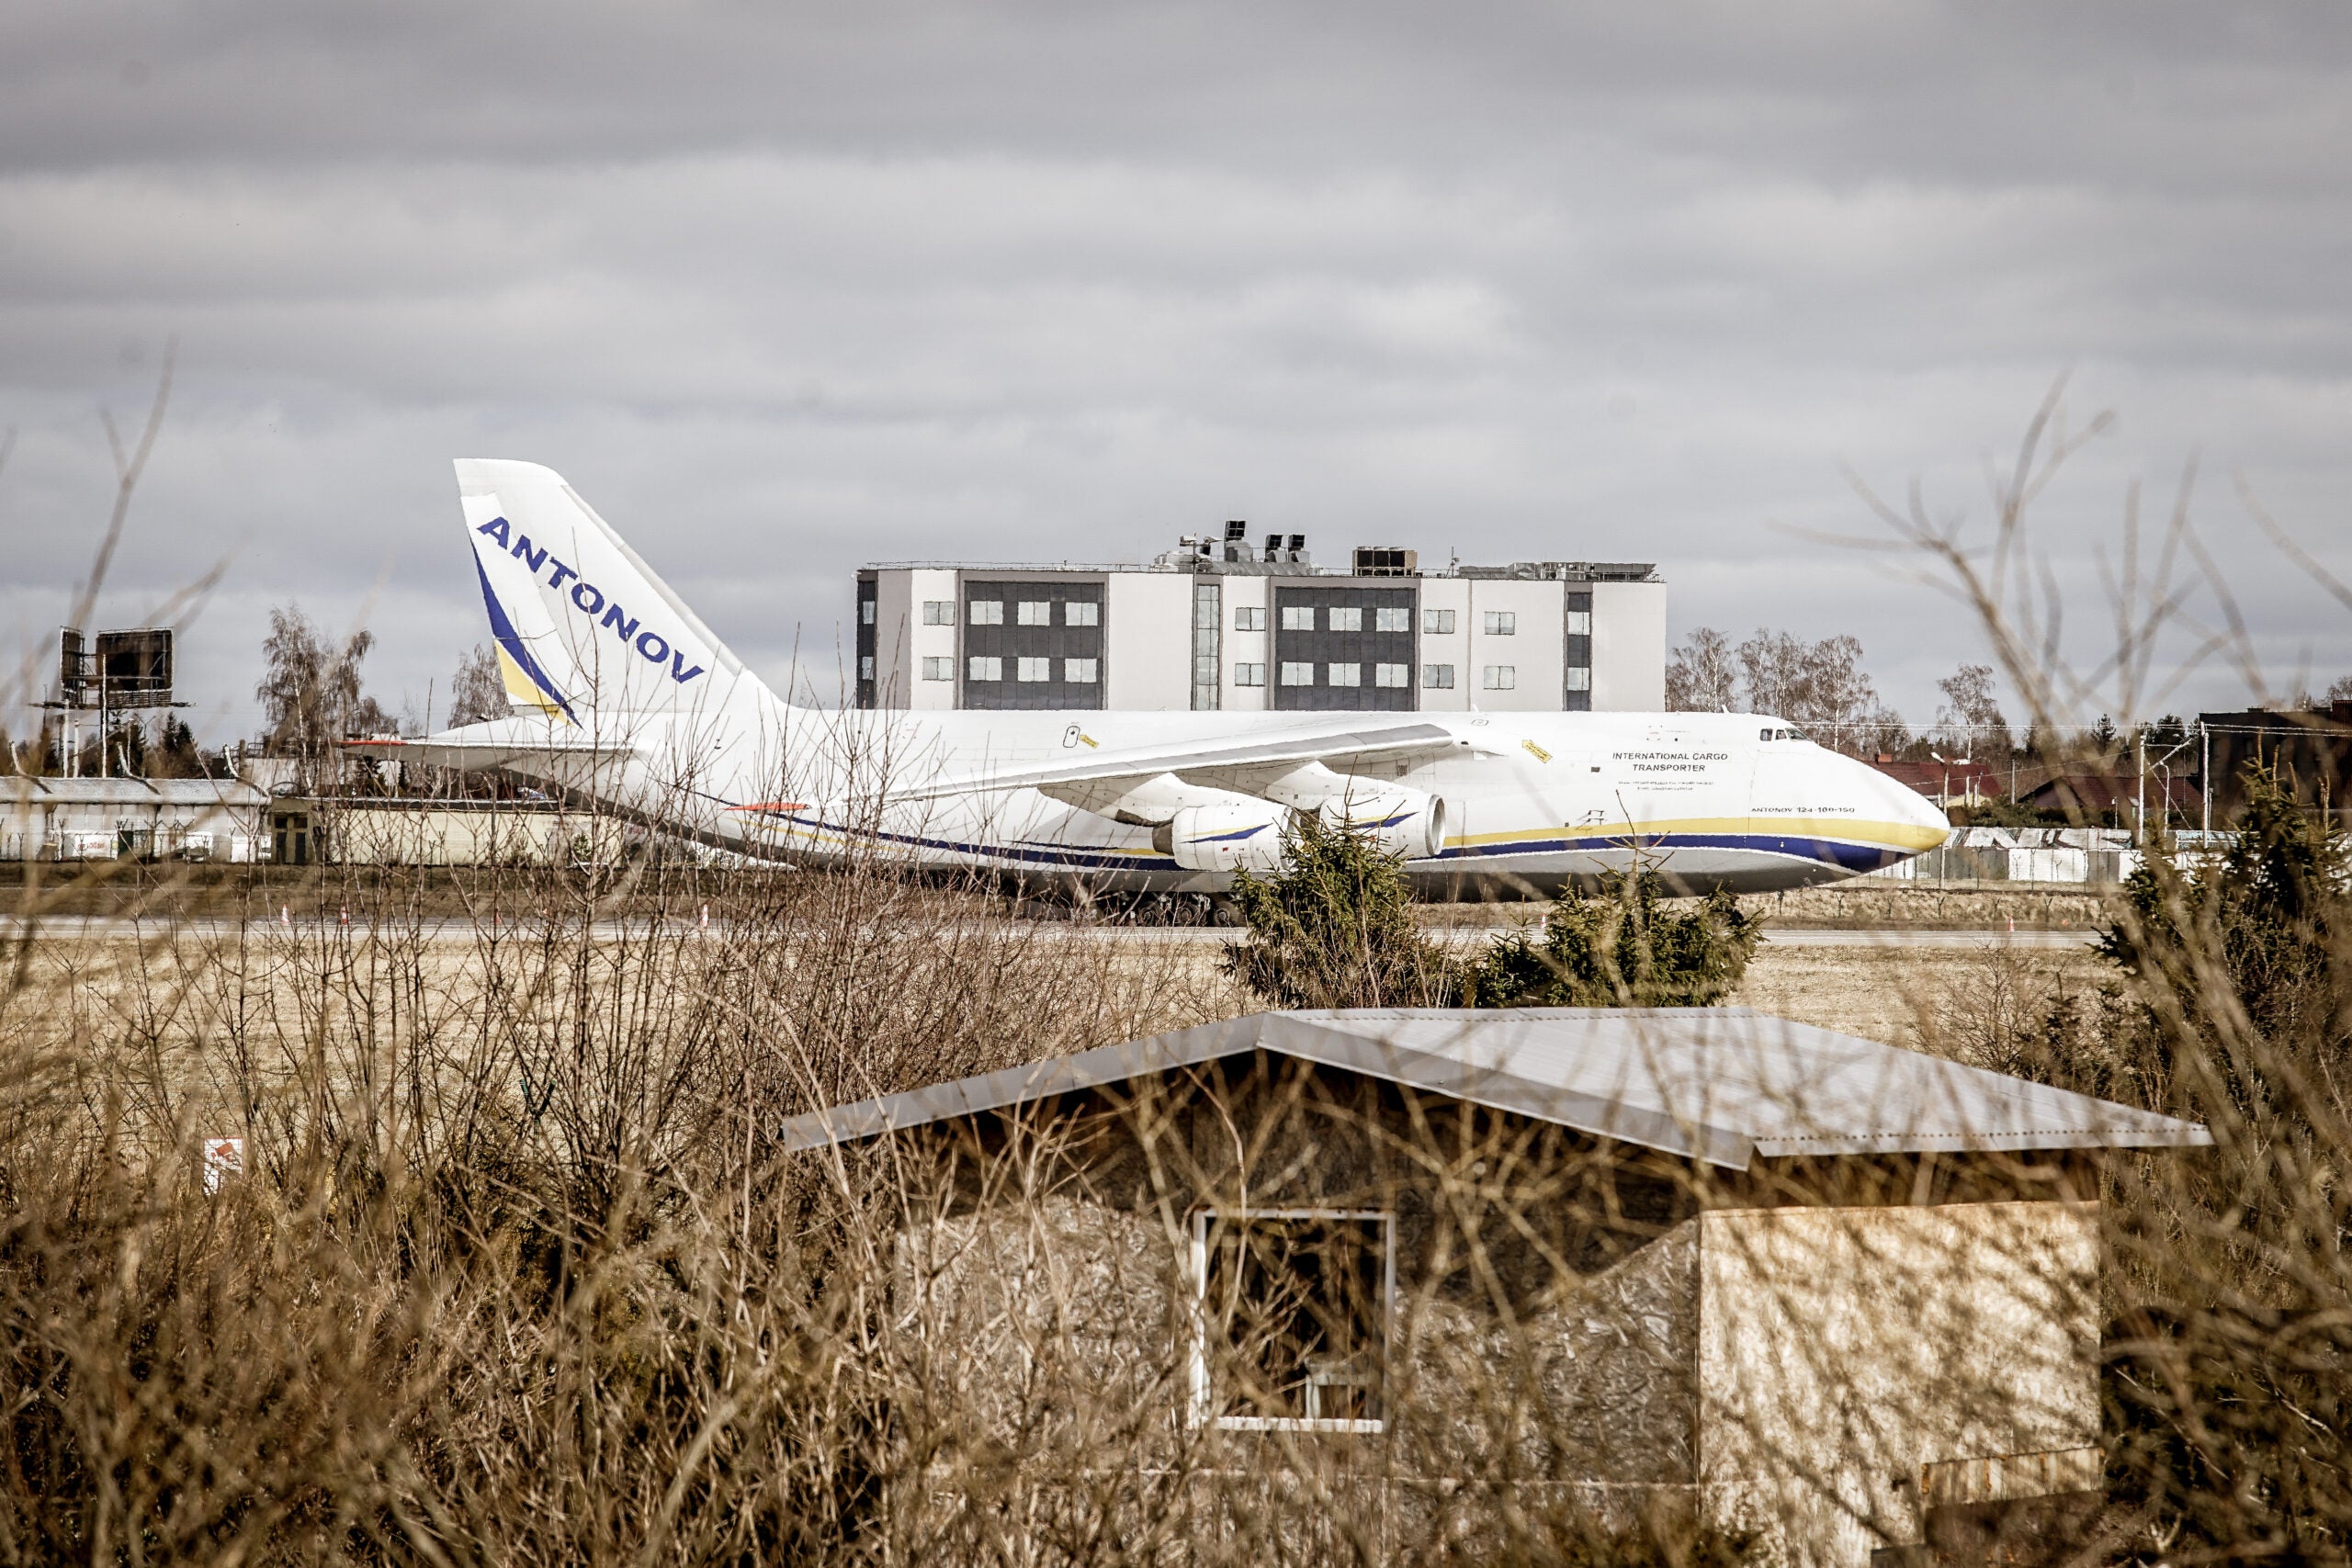 Ukrainian Antonov An-124 Ruslan reg no. UR-82072 is seen in Gdansk, Poland on 5 March 2022 Aircraft visits Gdansk during the Russian war against Ukraine. An-124 is a large, strategic airlift, four-engined aircraft , designed in the 1980s by the Antonov design bureau in the Ukrainian SSR. The plane is the world's heaviest gross weight production cargo airplane and heaviest operating cargo aircraft.  (Photo by Michal Fludra/NurPhoto via Getty Images)